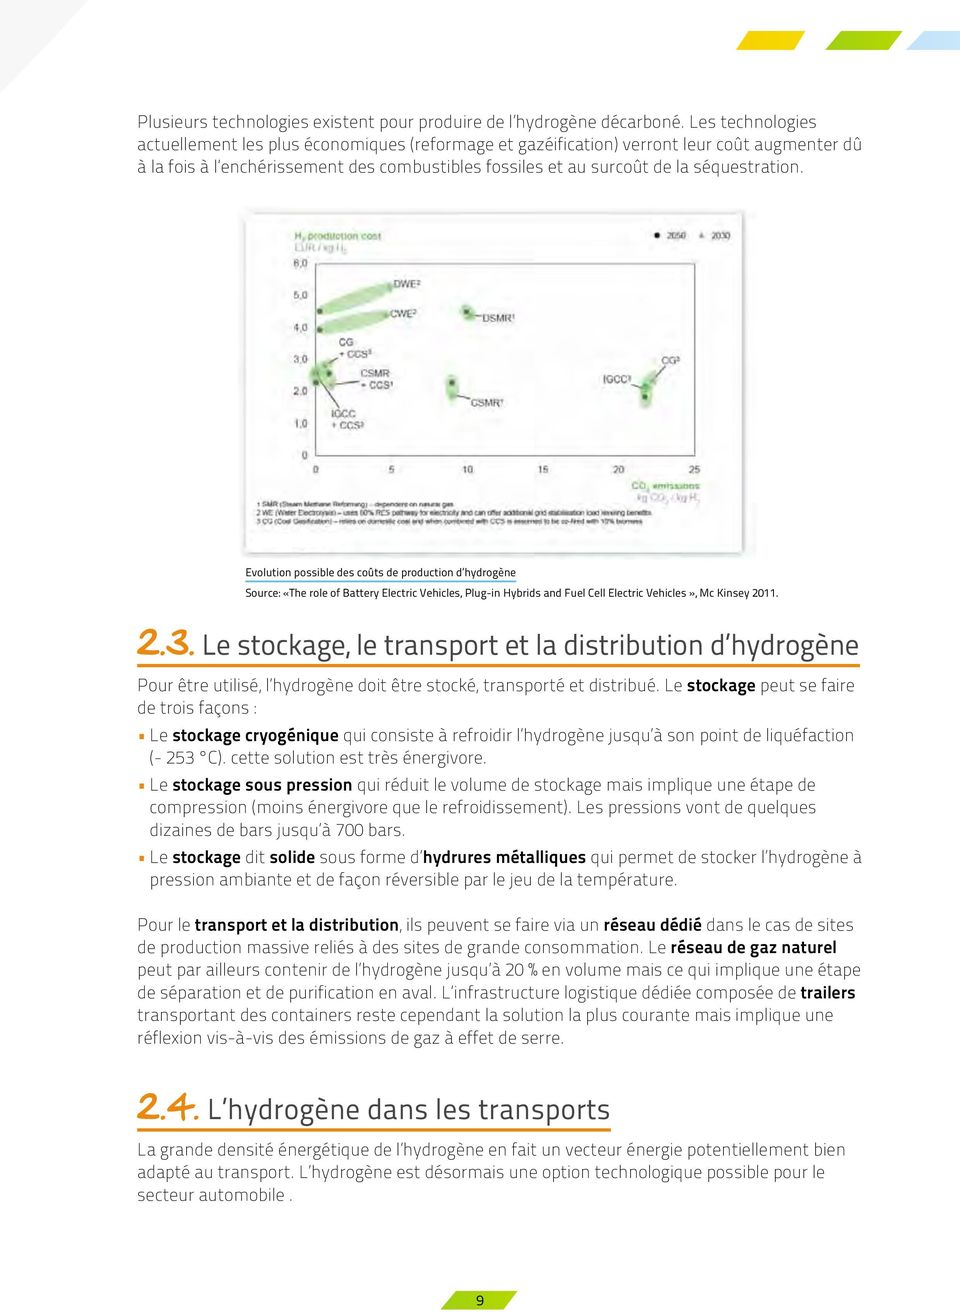 Evolution possible des coûts de production d hydrogène Source: «The role of Battery Electric Vehicles, Plug-in Hybrids and Fuel Cell Electric Vehicles», Mc Kinsey 2011. 2.3.